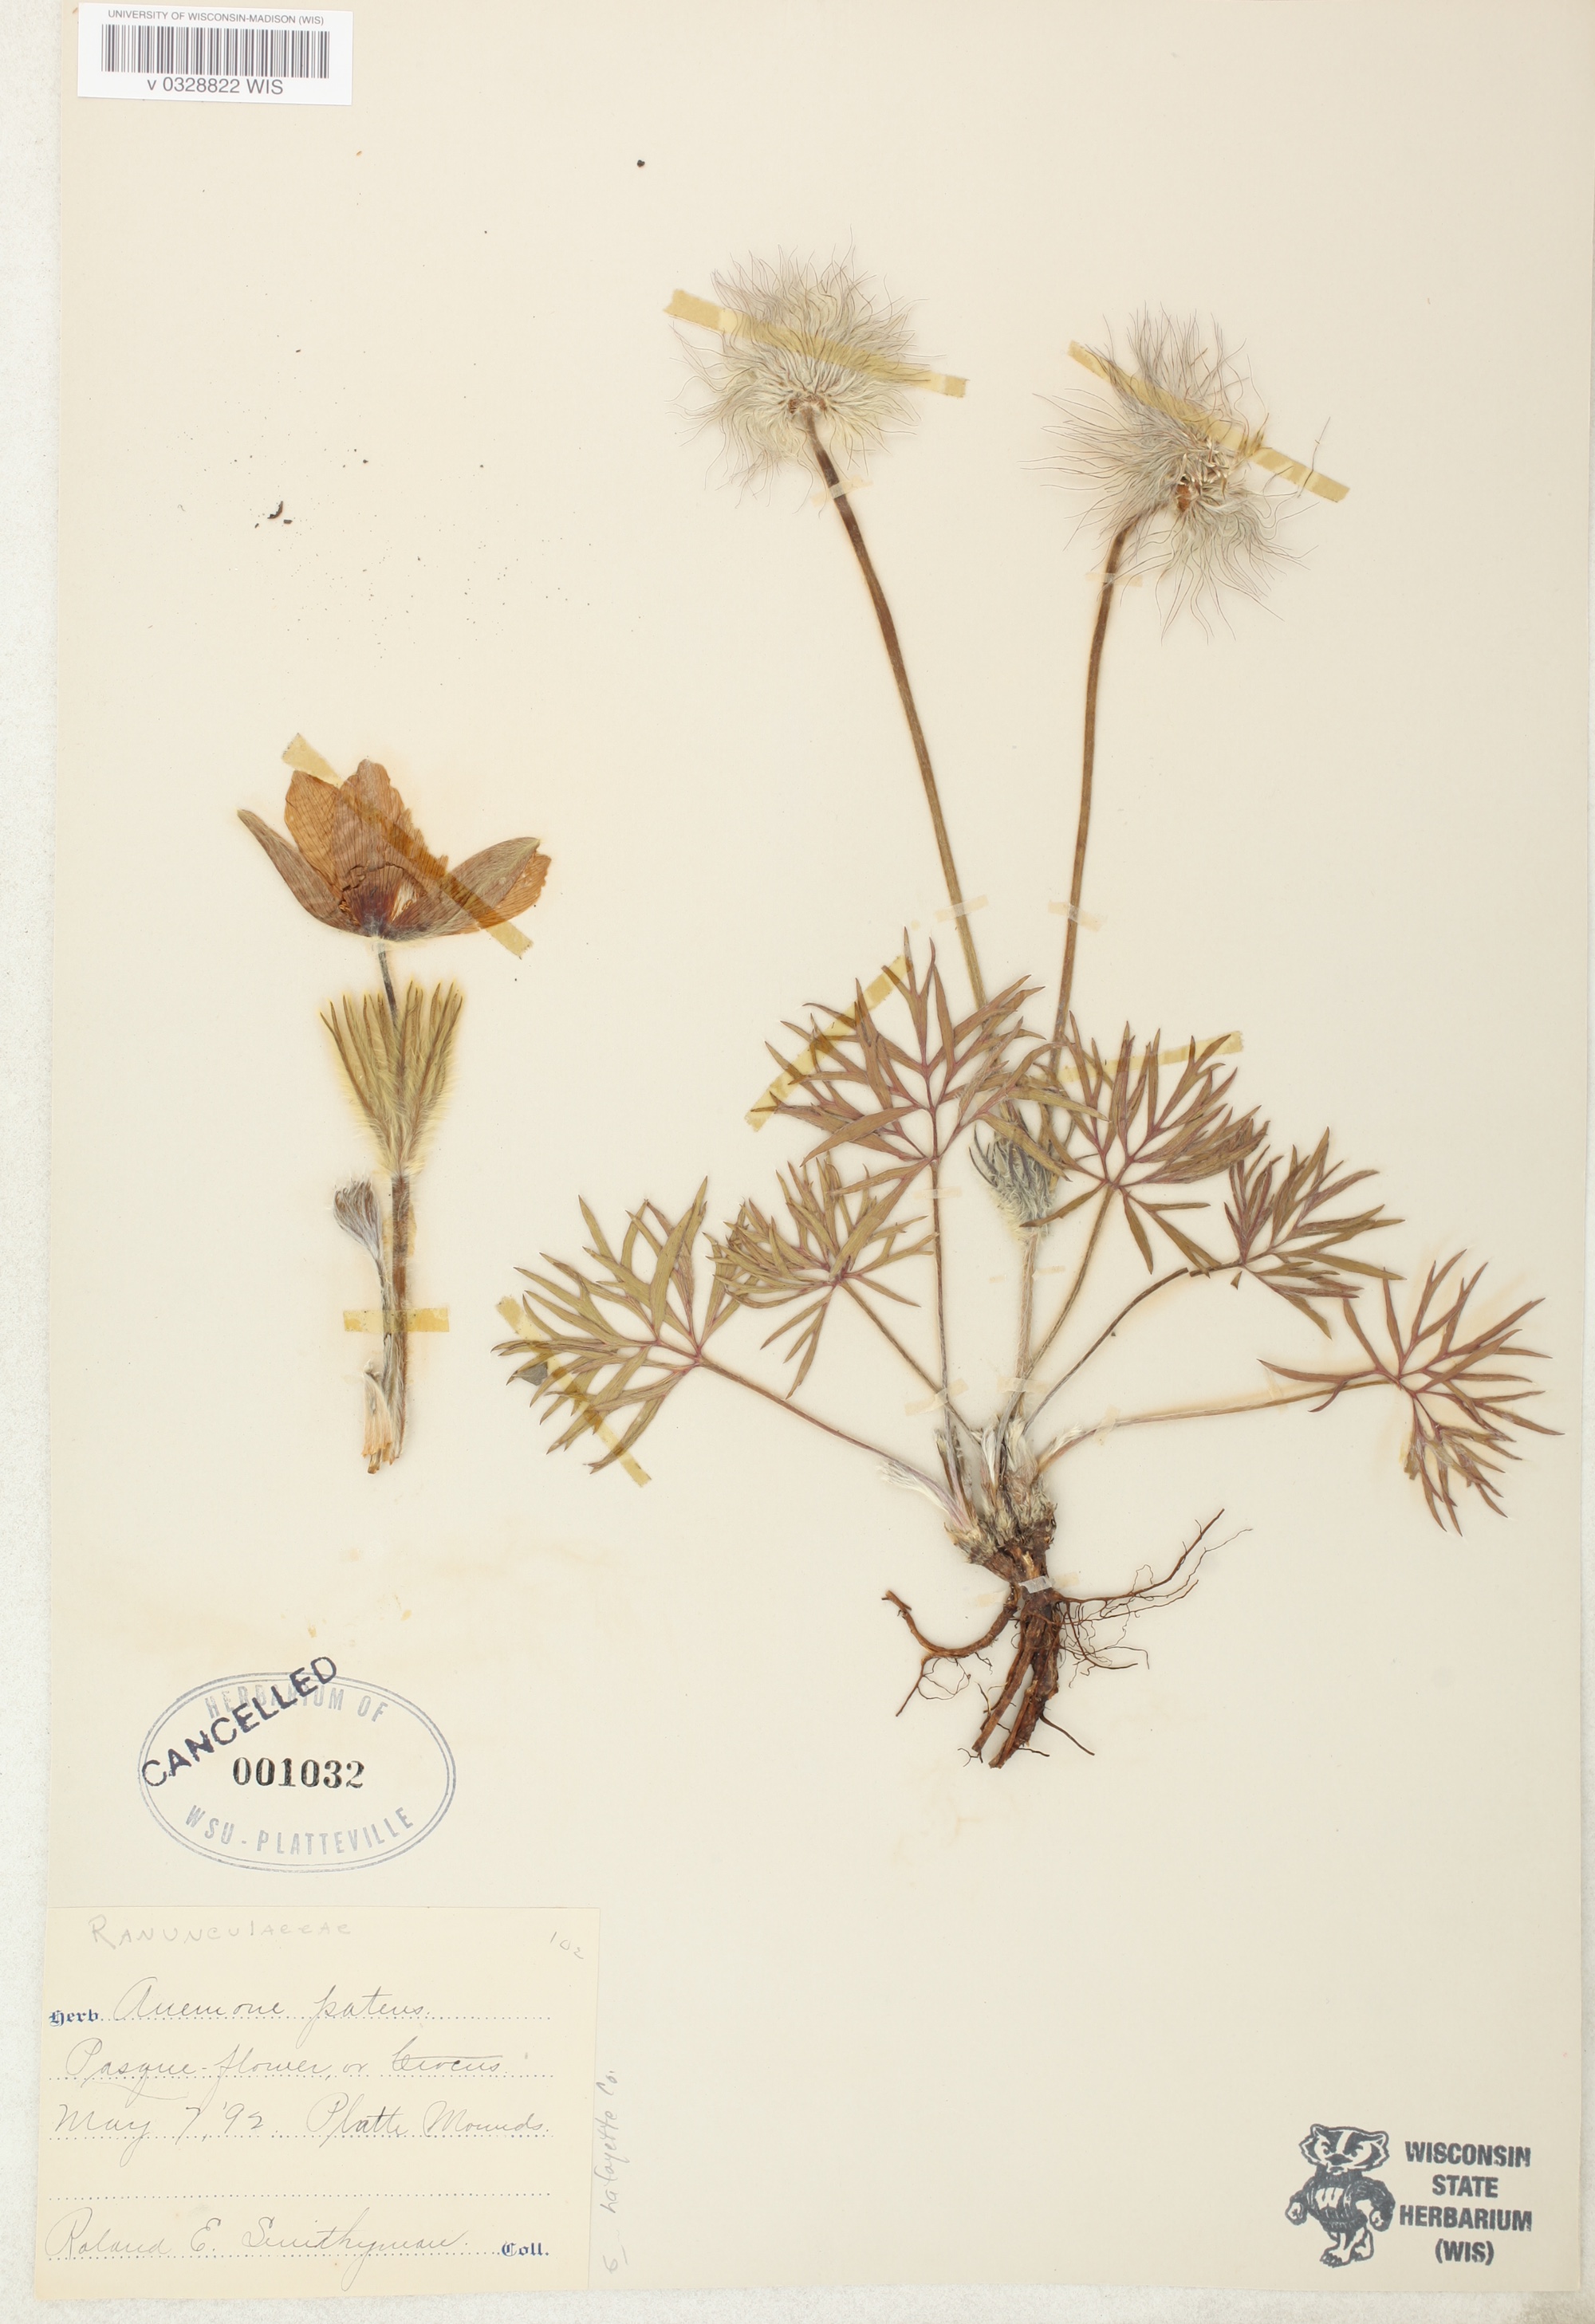 Pasque flower specimen collected on May 7, 1992 at Platte Mounds near Platteville, Wisconsin.